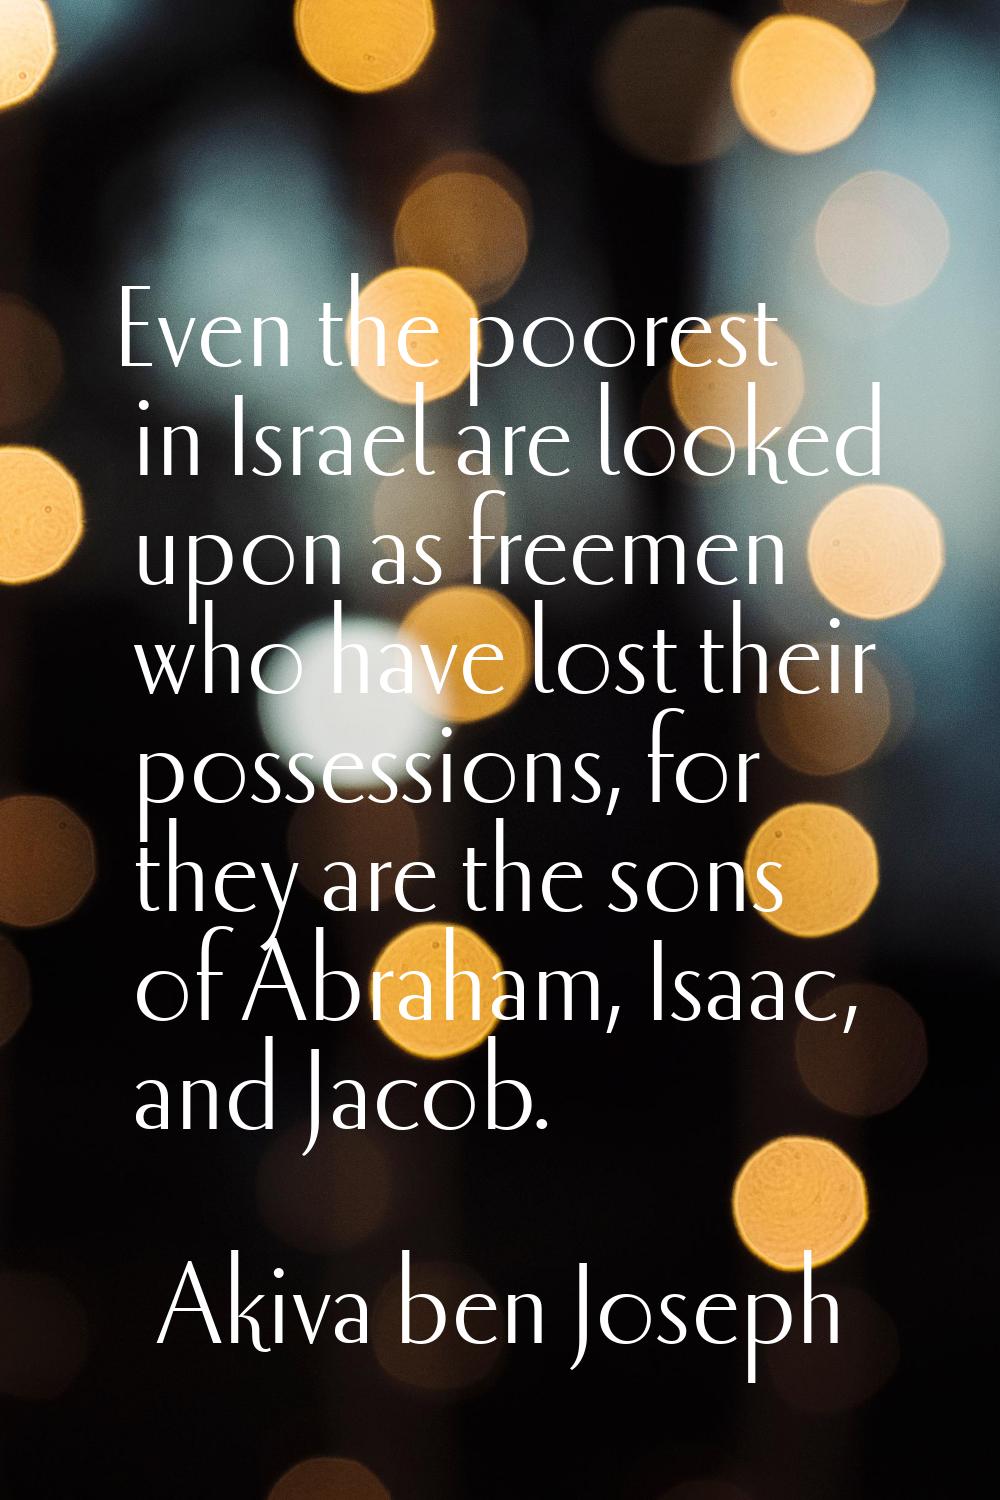 Even the poorest in Israel are looked upon as freemen who have lost their possessions, for they are